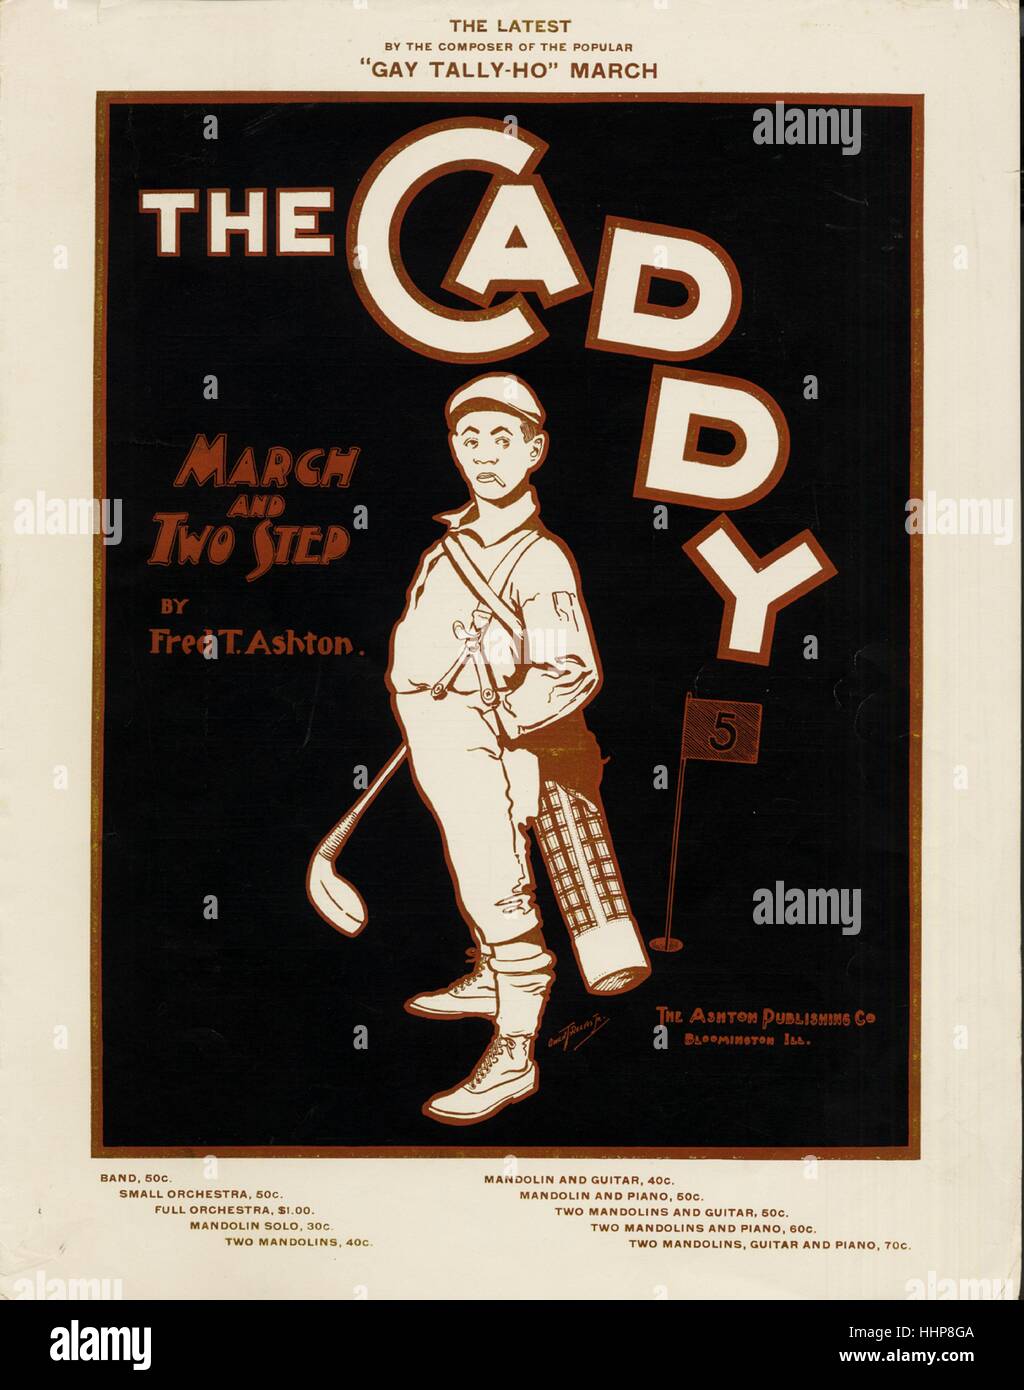 Sheet music cover image of the song 'The Caddy March and Two-Step', with original authorship notes reading 'By Fred T Ashton', 1900. The publisher is listed as 'The Ashton Publishing Co.', the form of composition is 'sectional, with trio', the instrumentation is 'piano', the first line reads 'None', and the illustration artist is listed as 'Owen T. Reeves Jr.'. Stock Photo